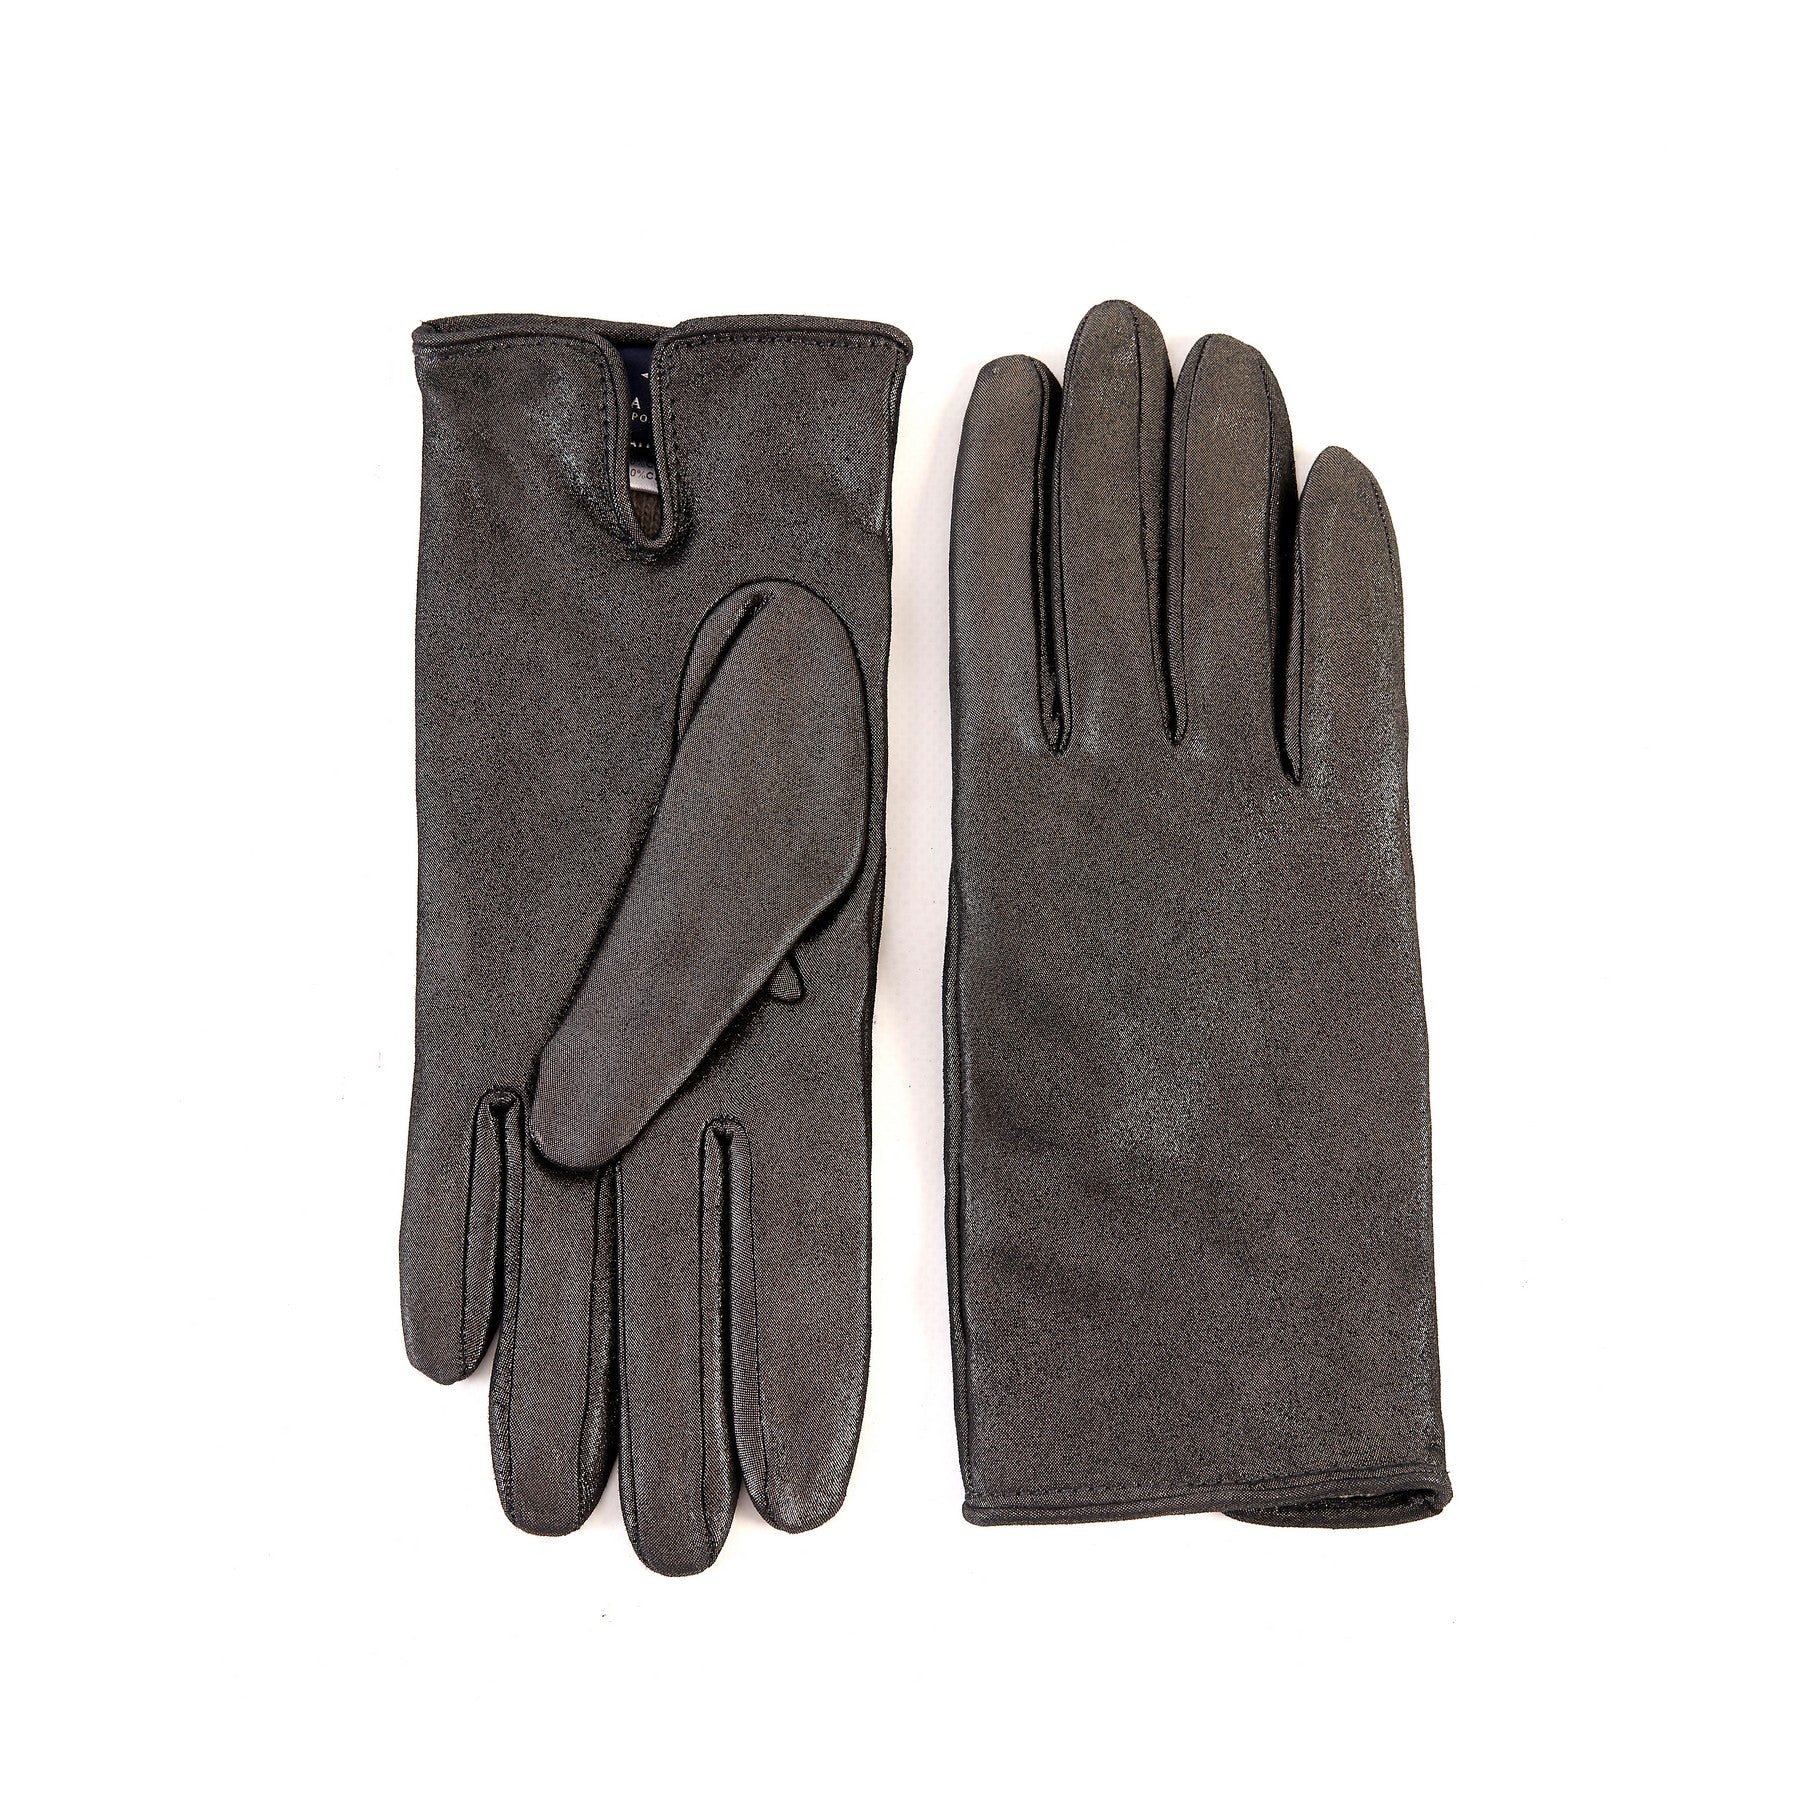 Women’s basic grey soft laminated suede leather gloves with palm opening and mix cashmere lining